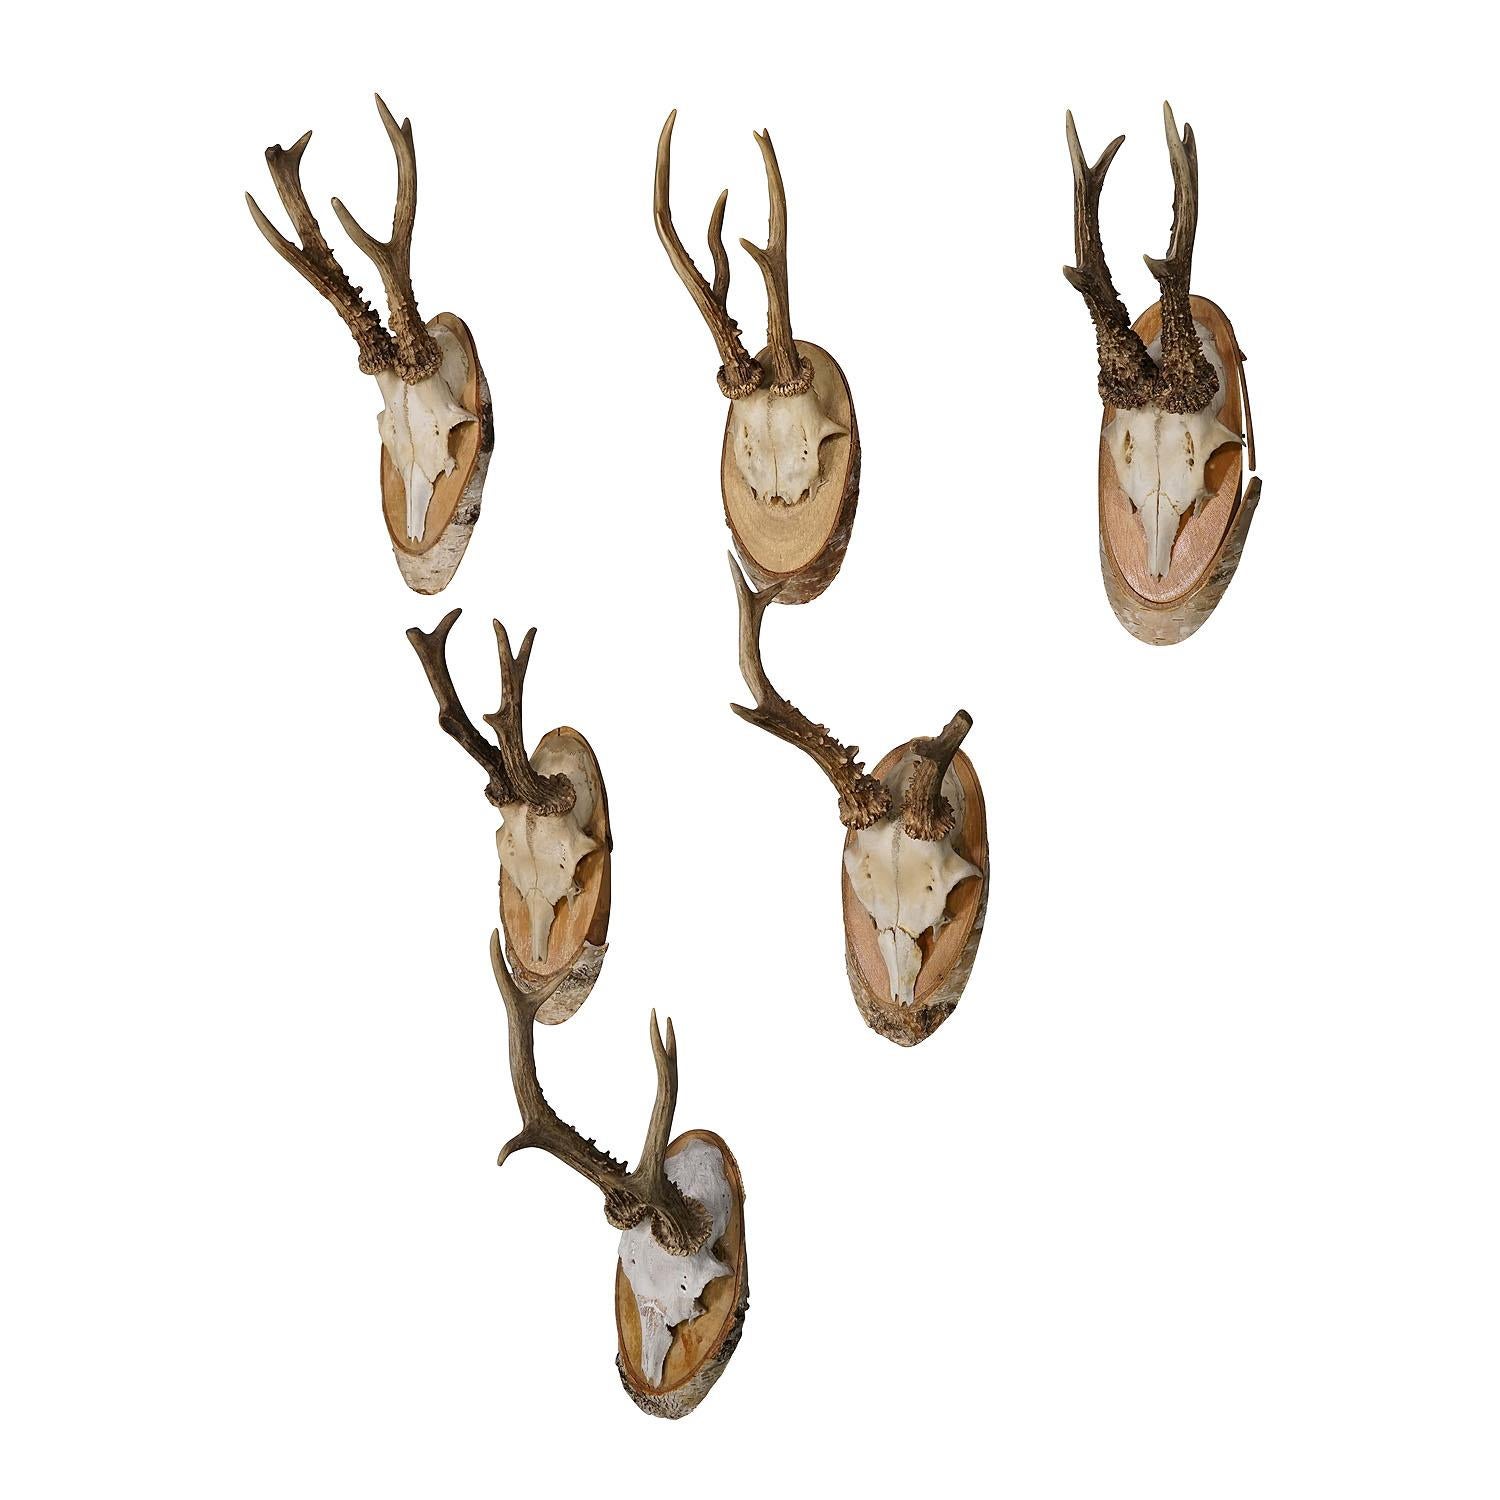 Six large vintage deer trophies on birch wood plaques Germany ca. 1950s.

A set of six large Black Forest deer (Capreolus capreolus) trophies mounted on birch wood plaques. The trophies were shot in Germany around the 1950s. A great addition to